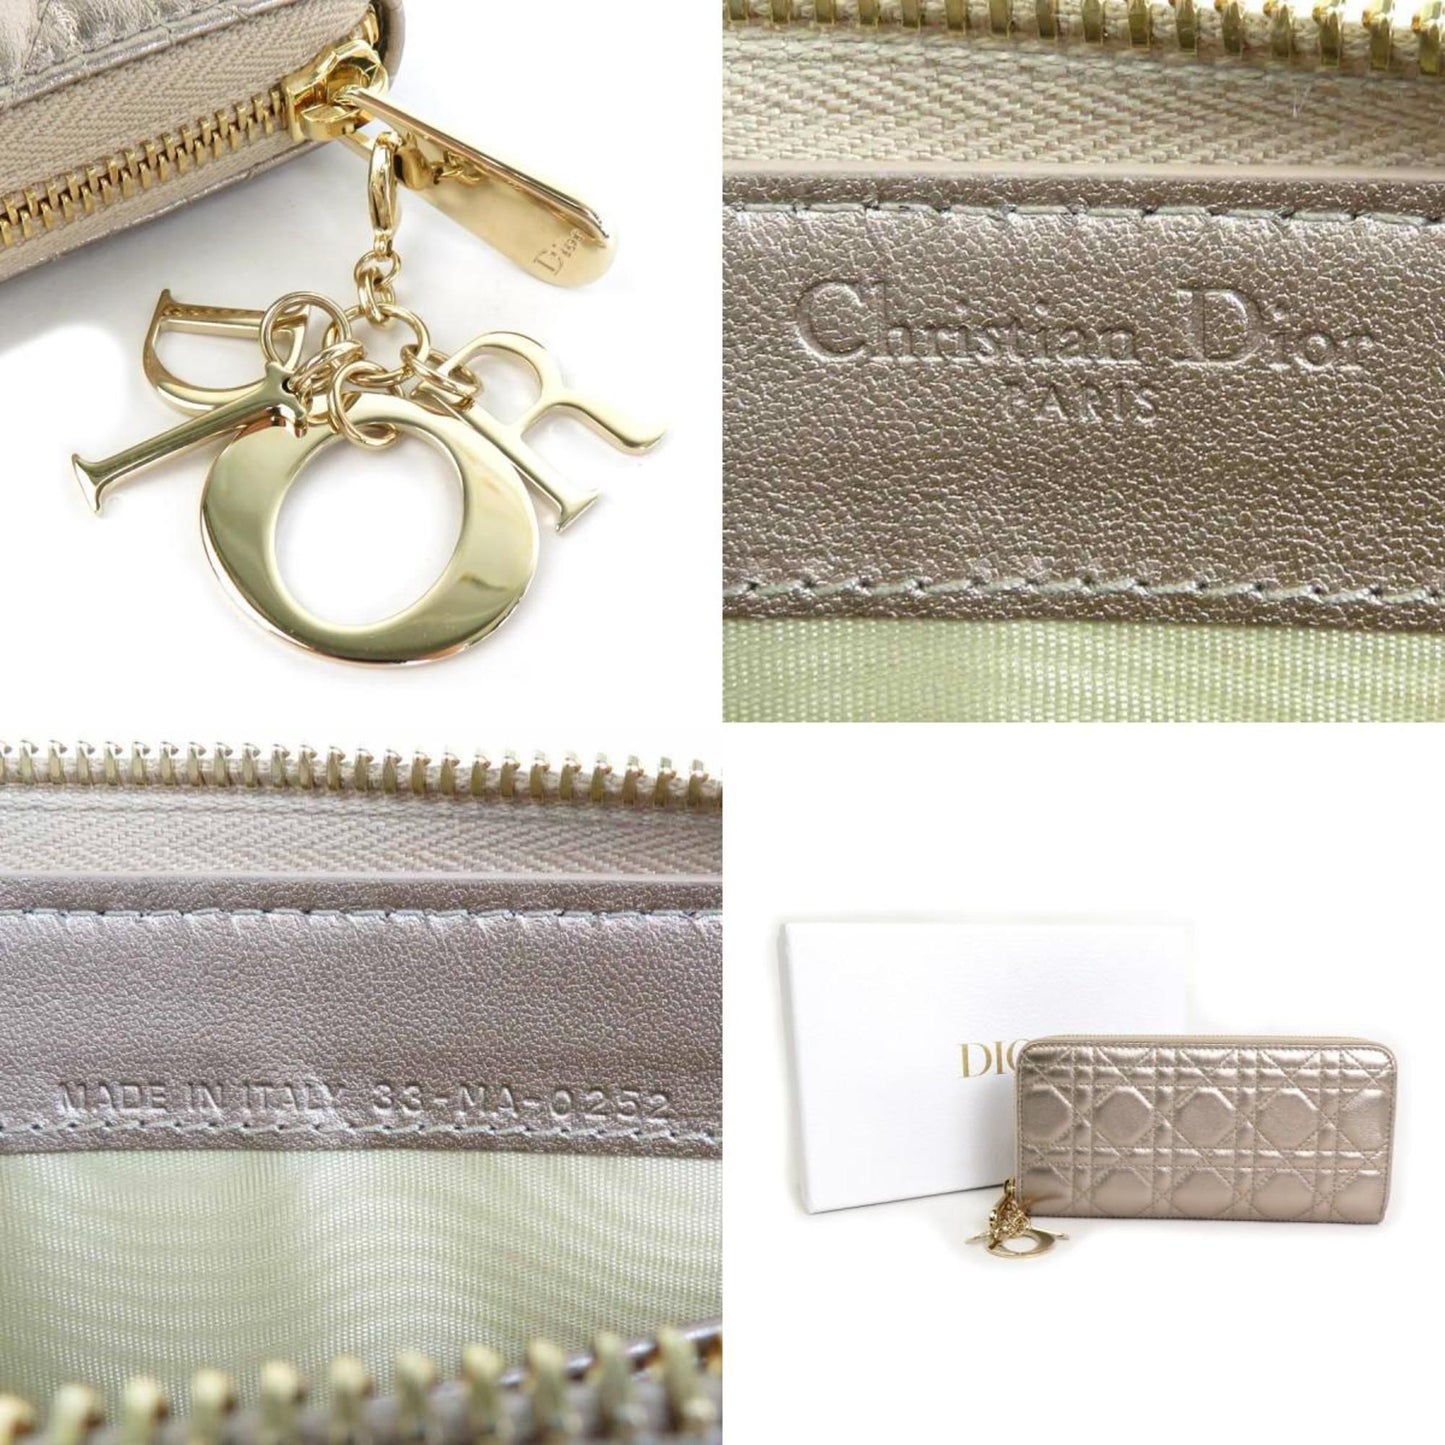 Dior Women's Gold Leather Wallet with Cannage Stitching and D.I.O.R. Charm in Gold